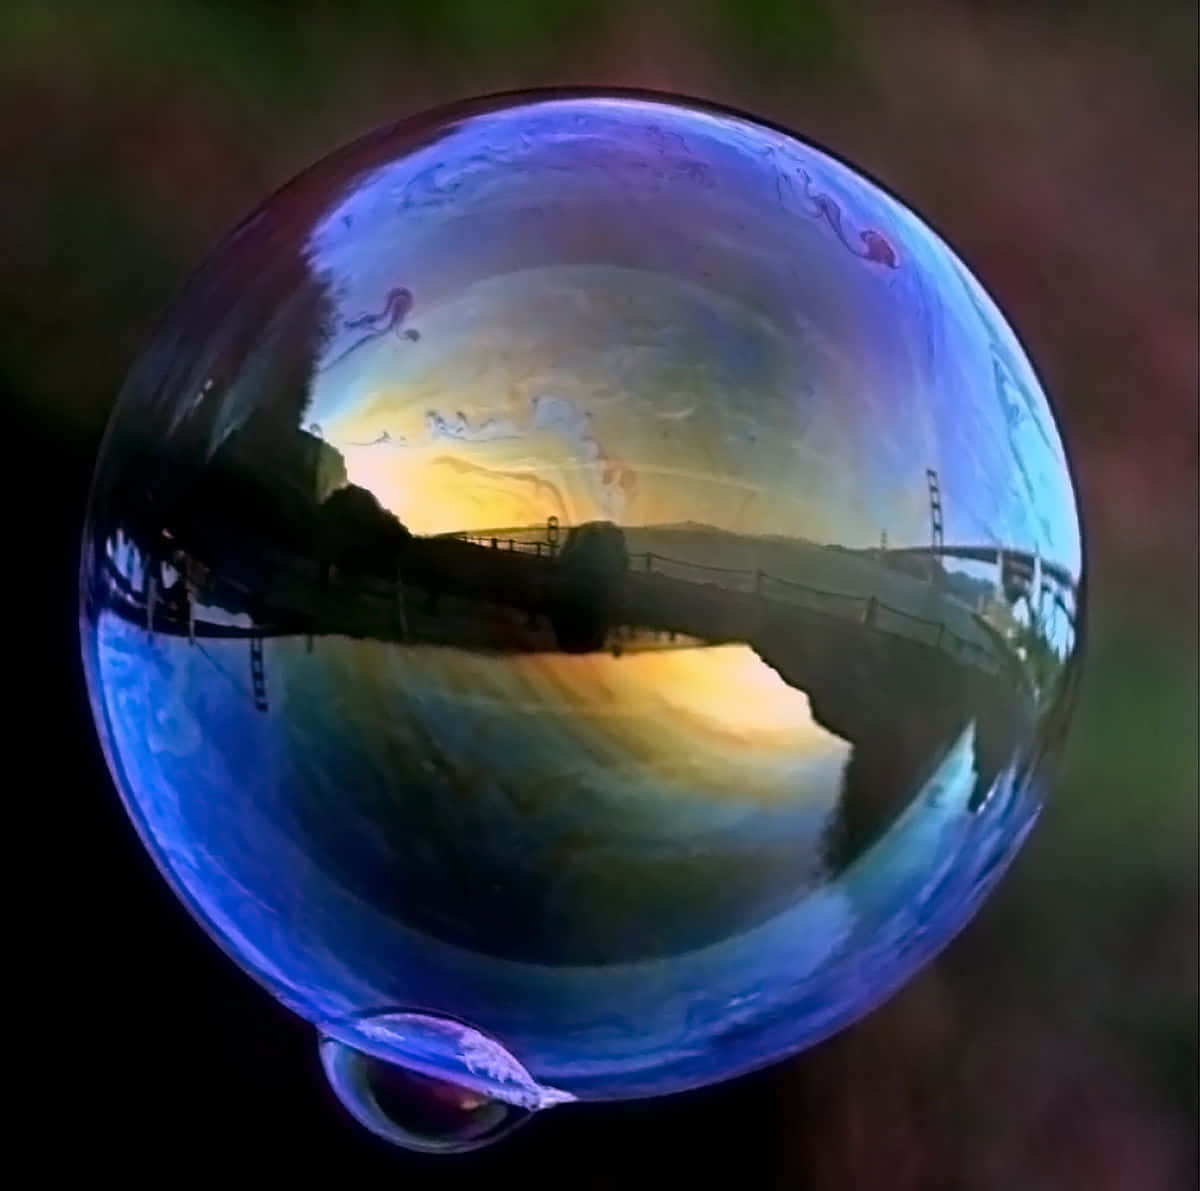 Explore the natural beauty of a bubble